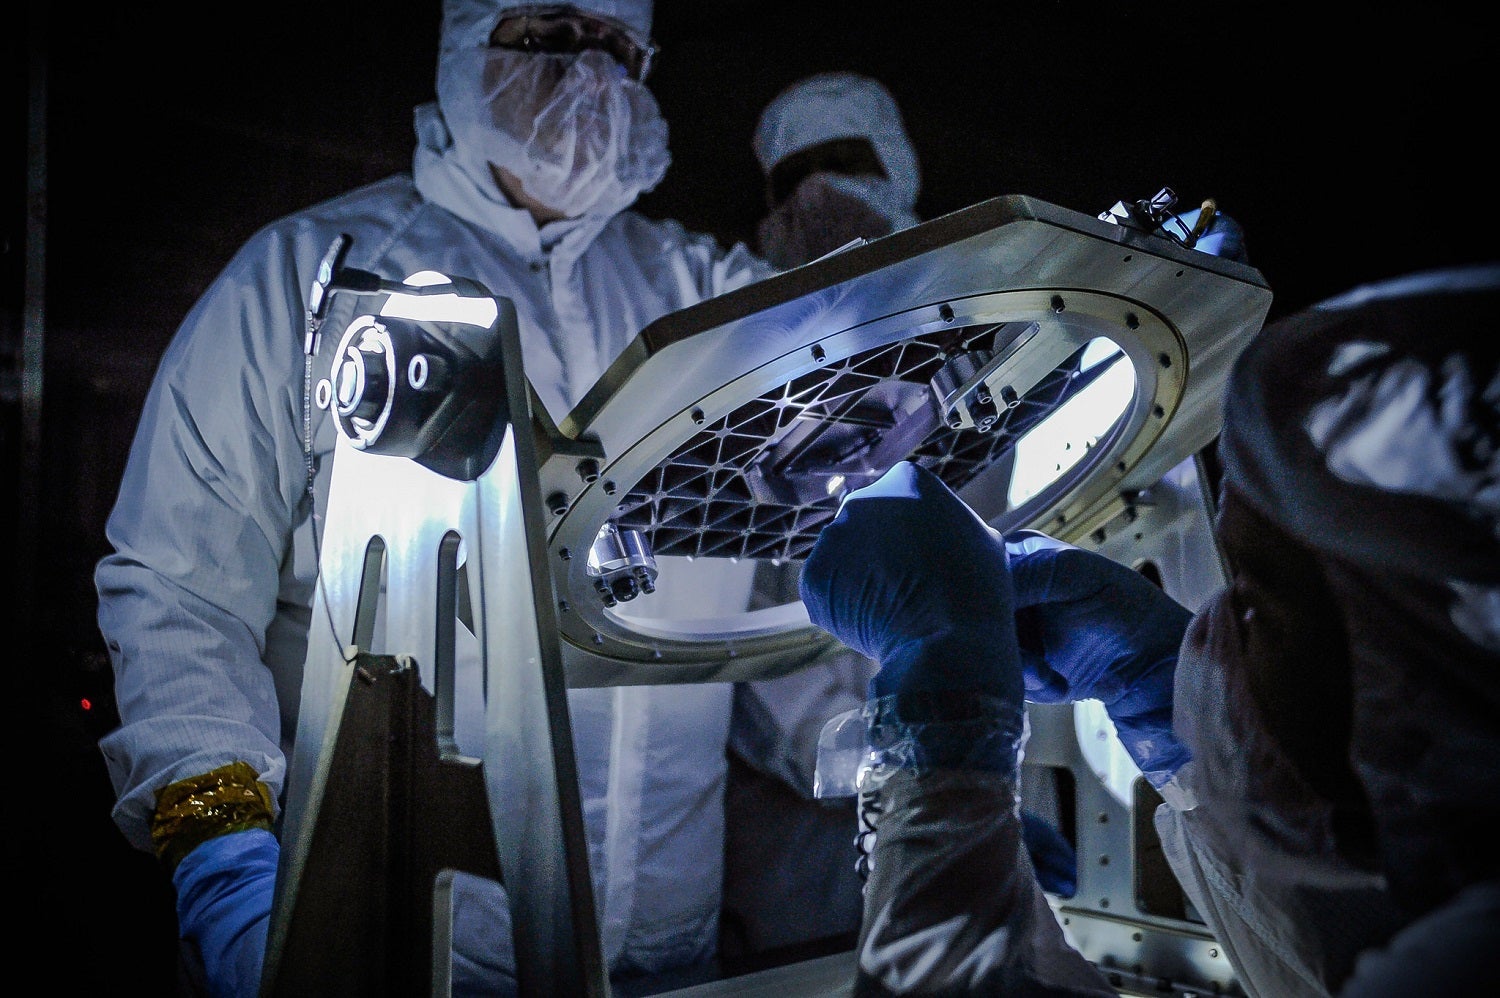 NASA engineers inspect a new piece of technology developed for the James Webb Space Telescope.